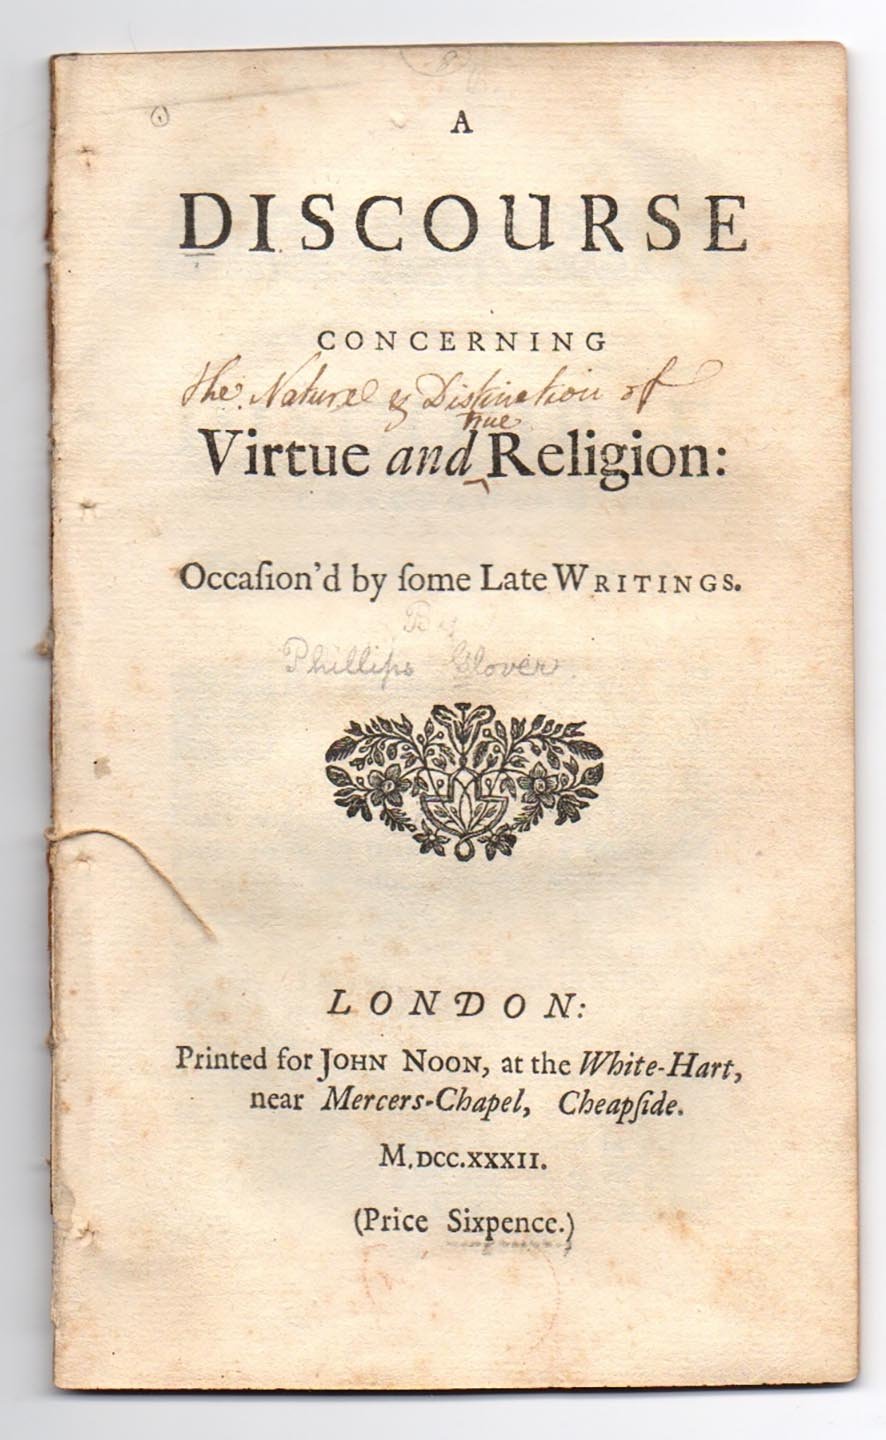 A Discourse Concerning Virtue and Religion: Occasioned by Some Late Writings